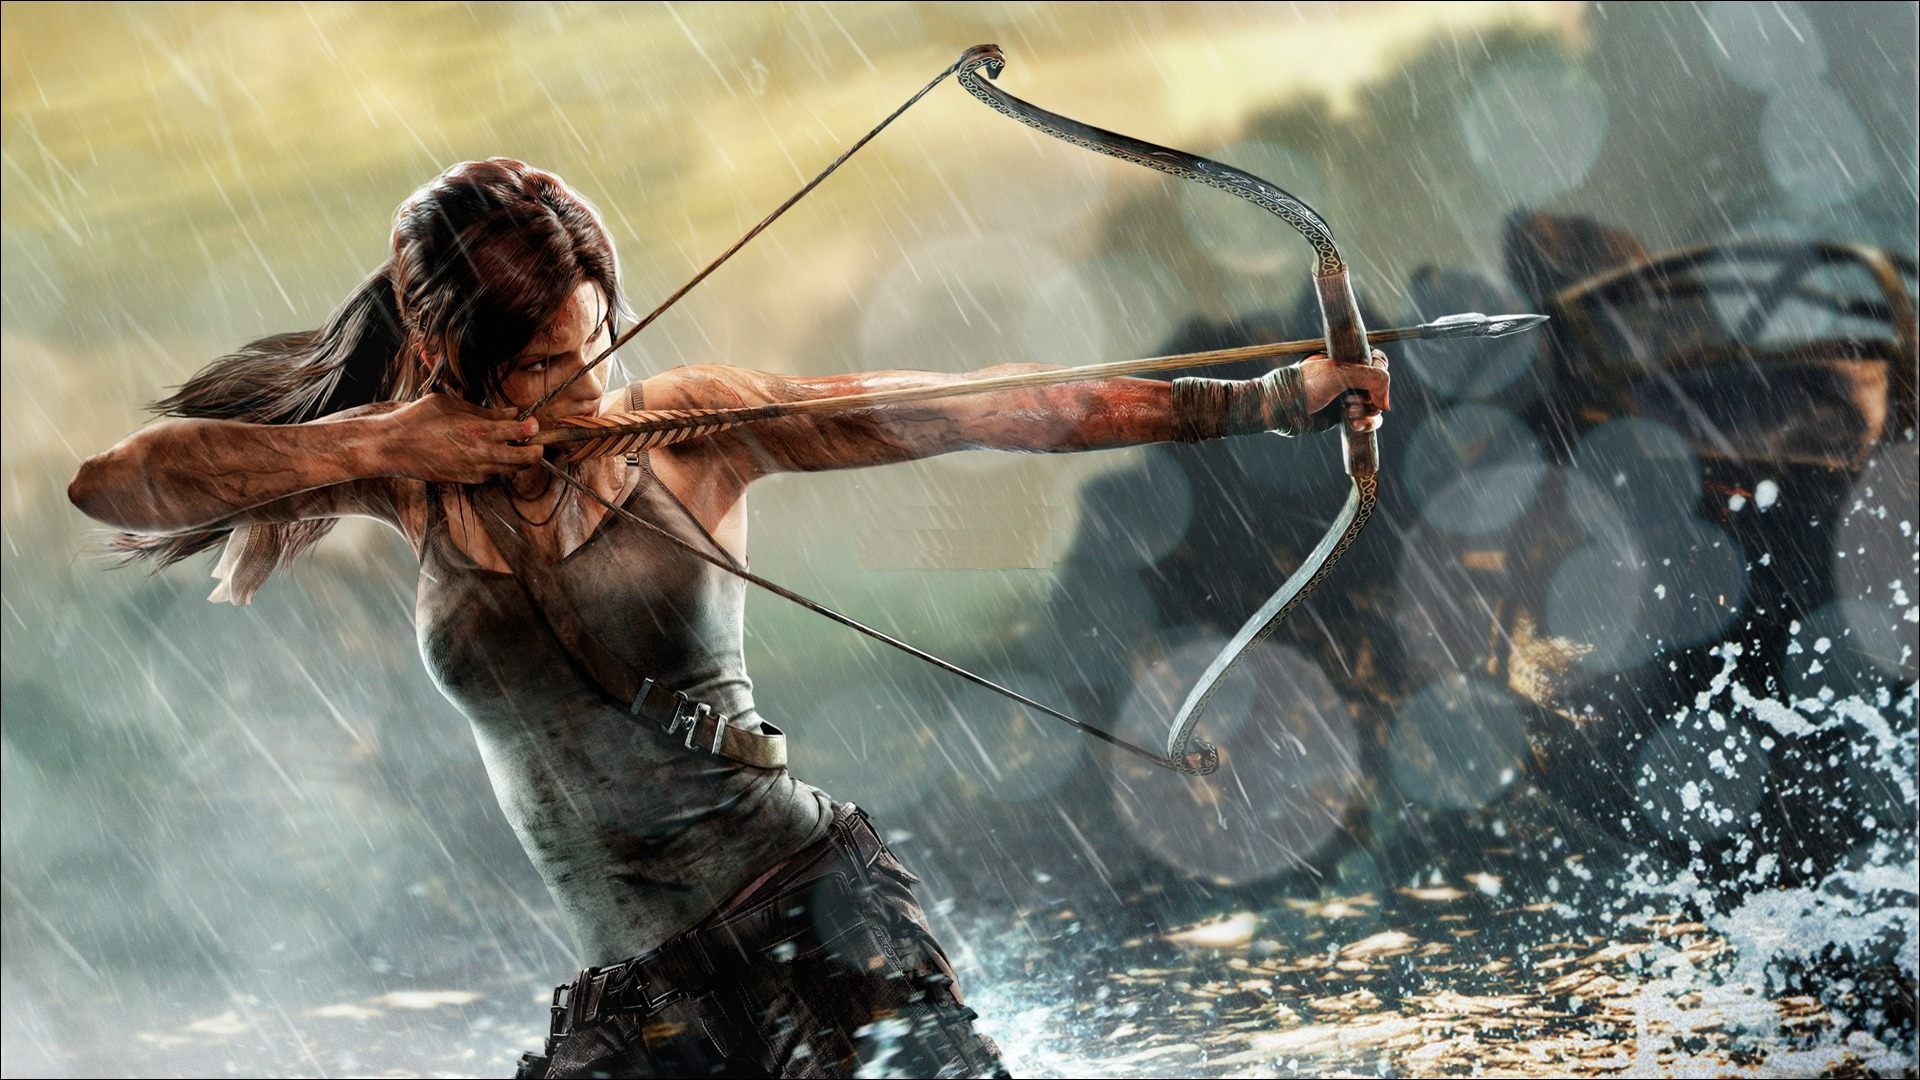 Rise of the Tomb Raider Wallpaper 2020